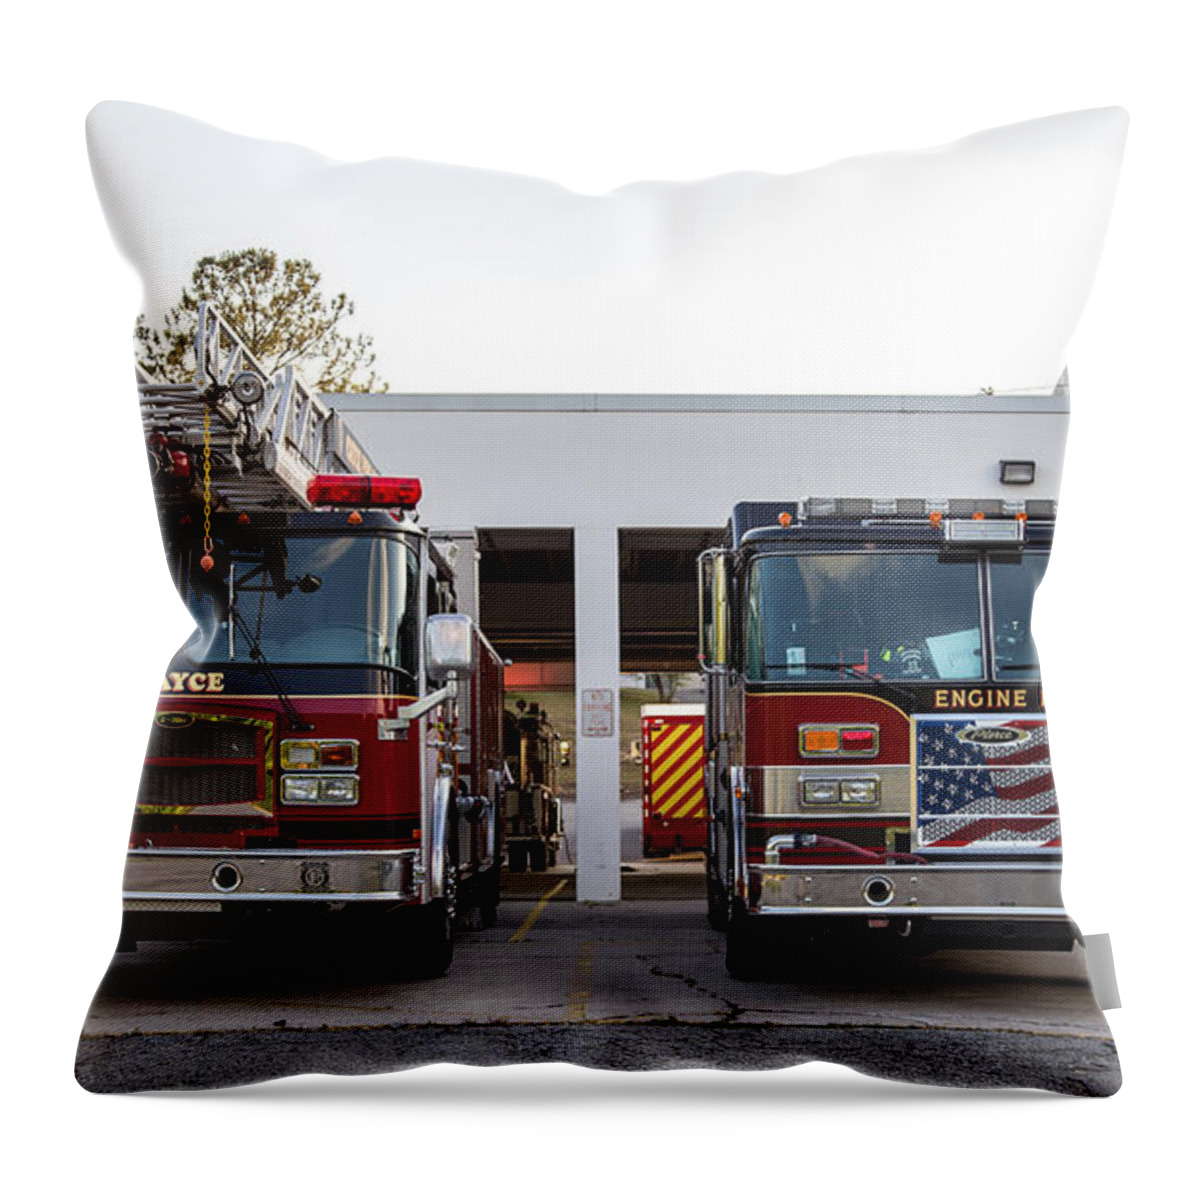 Cayce Throw Pillow featuring the photograph Cayce Fire Trucks-1 by Charles Hite